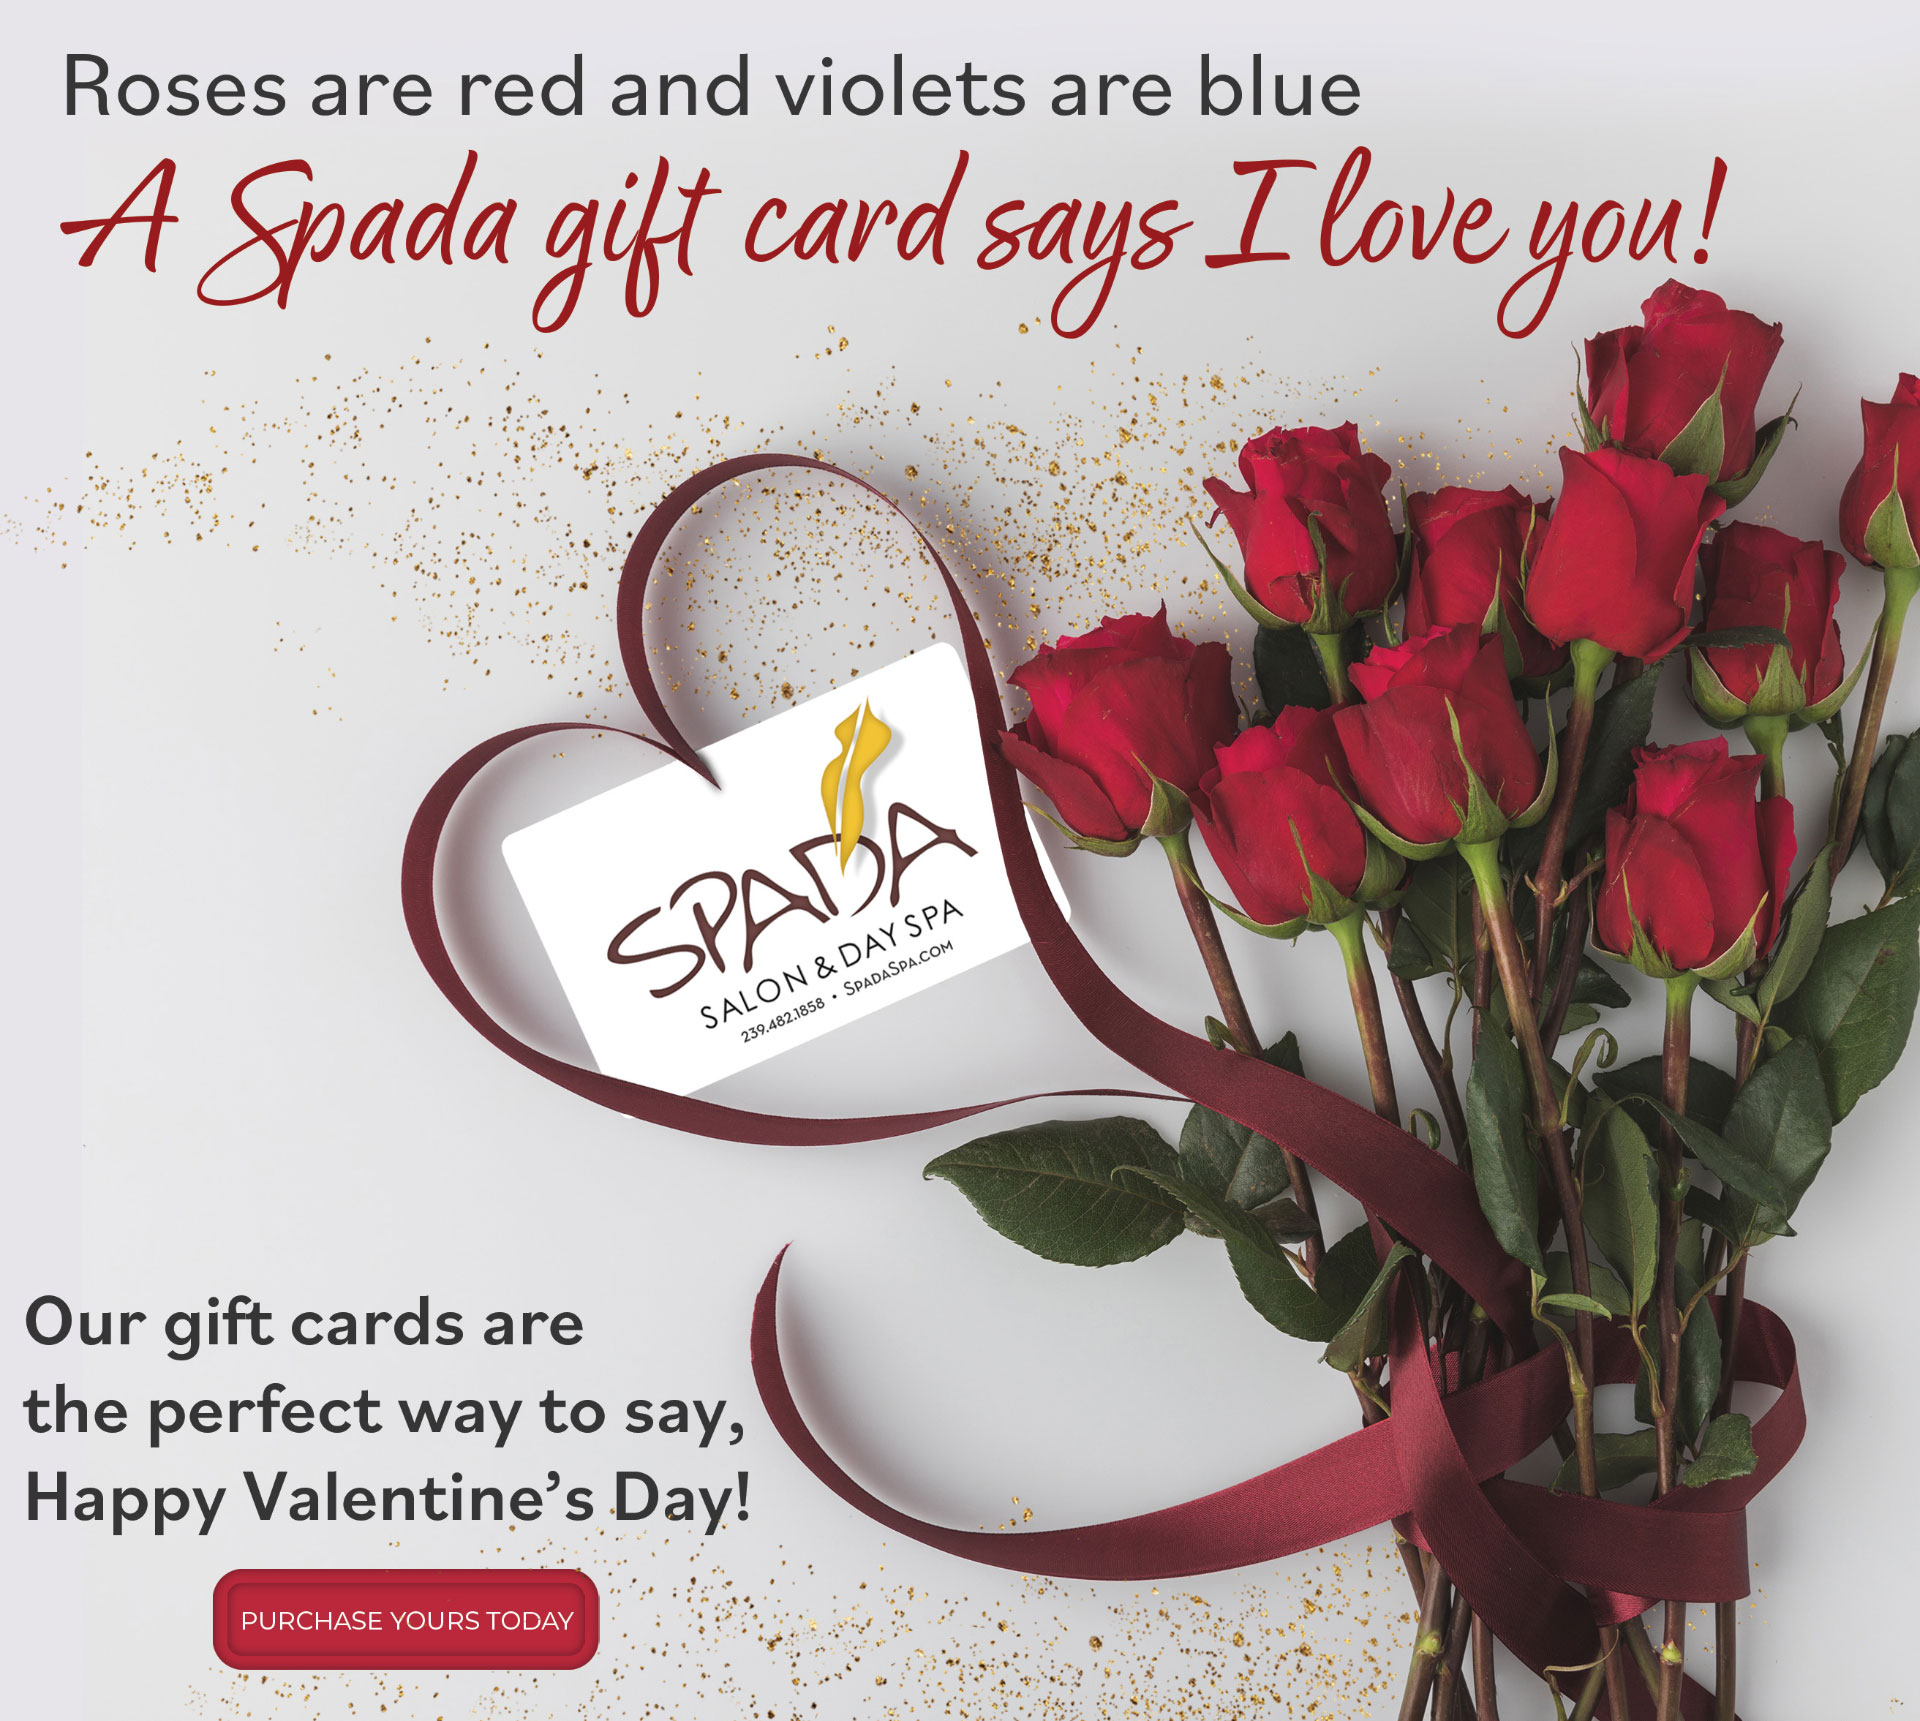 Roses are red and violets are blue. A Spada gift card says I love you! Our gift cards are the perfect way to say, Happy Valentine's Day!